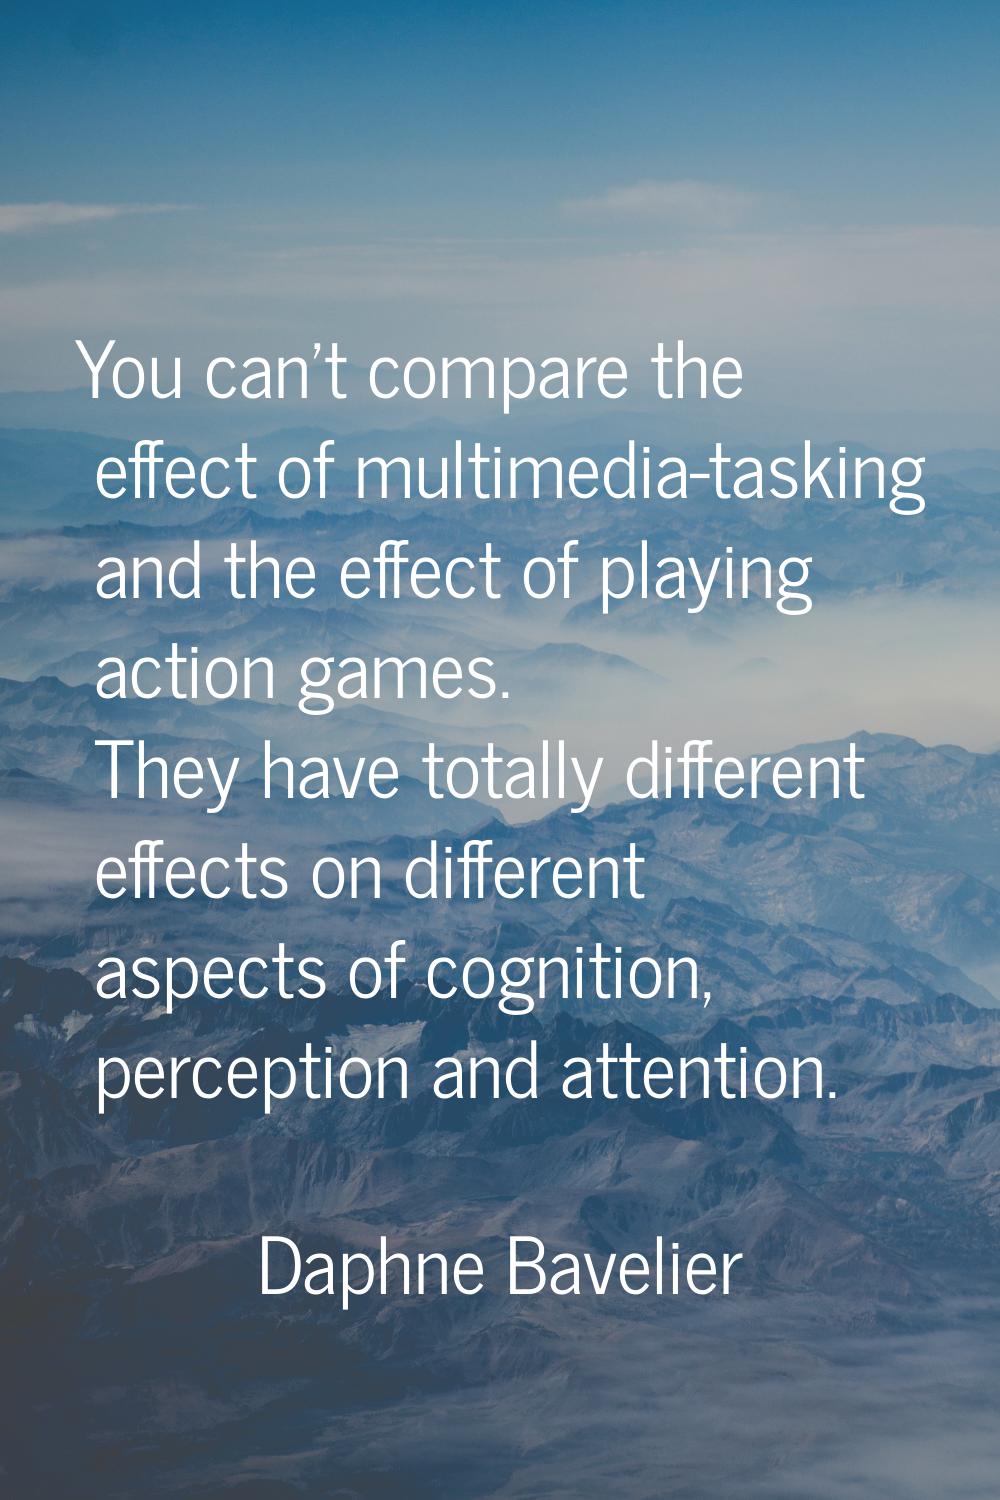 You can't compare the effect of multimedia-tasking and the effect of playing action games. They hav